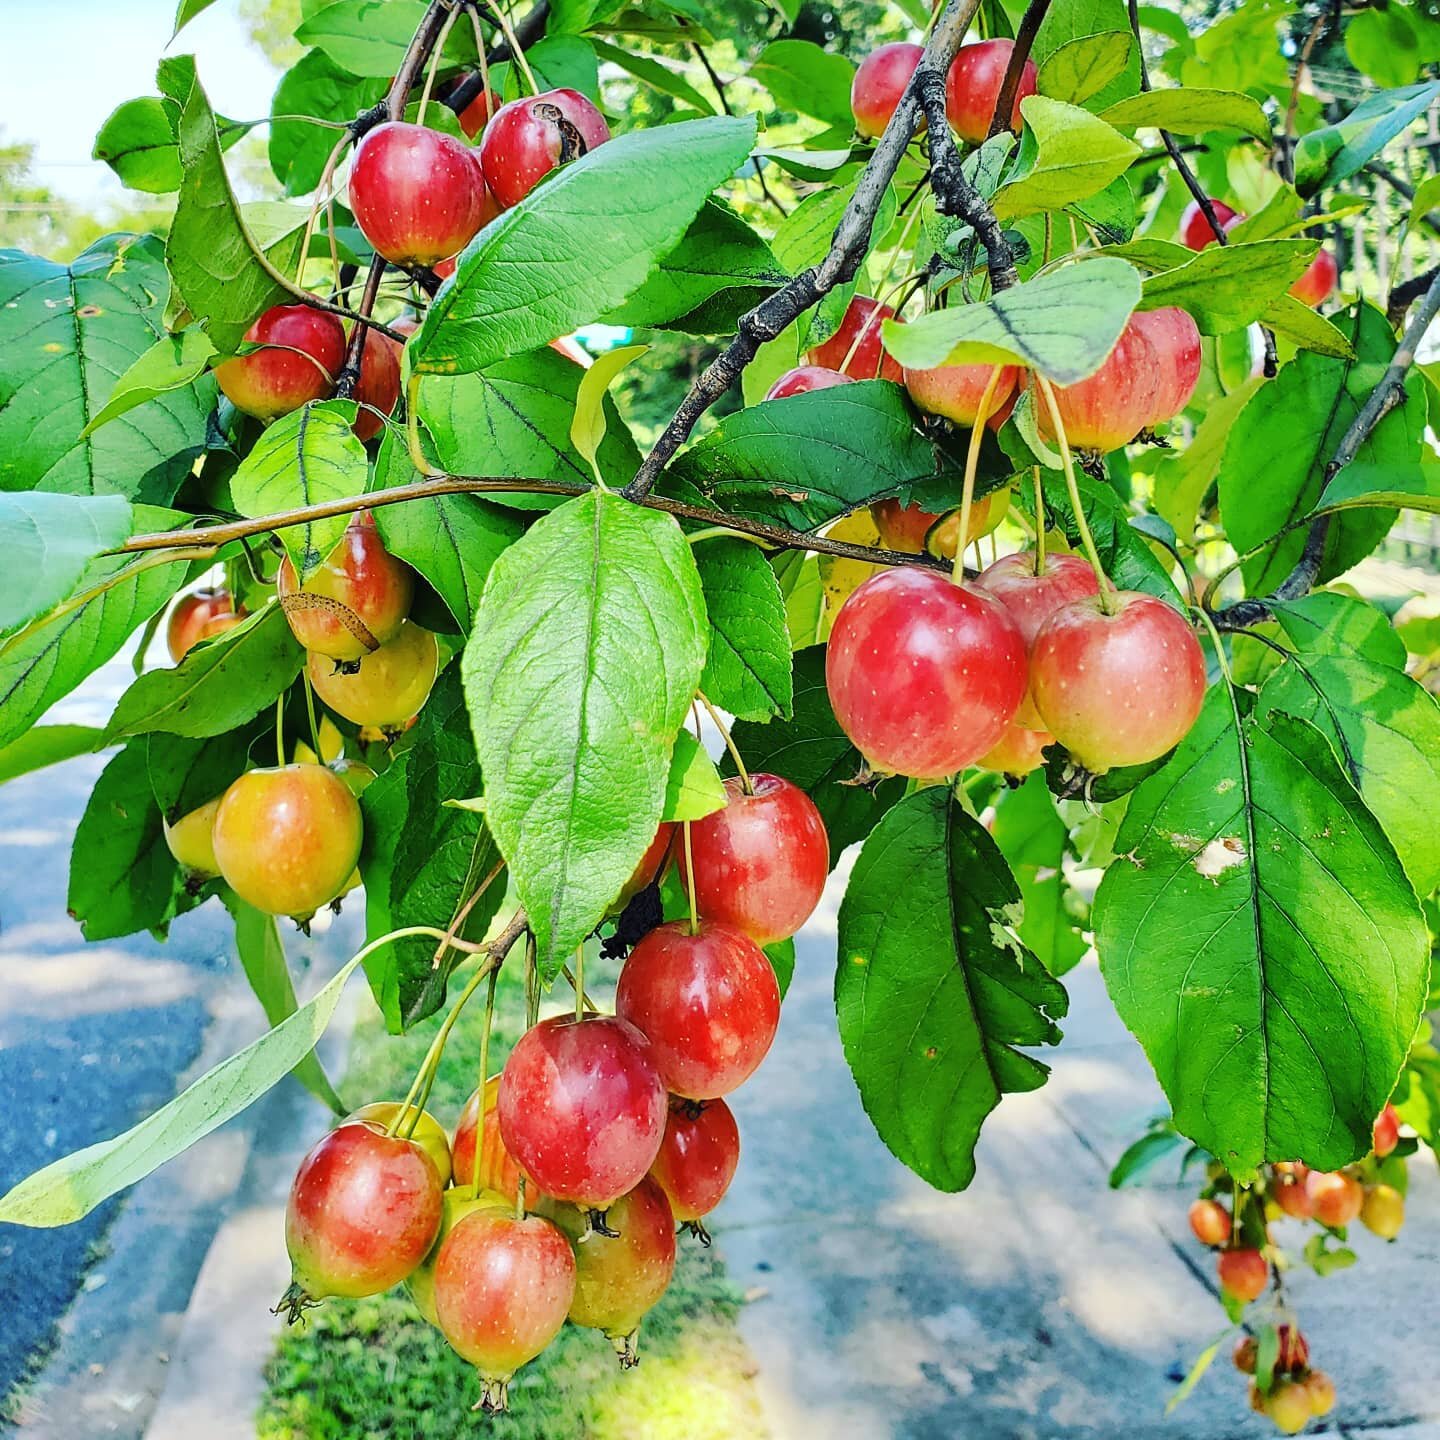 What a beautiful day to get out and enjoy the sun 🌞  As well as a fresh picking of crab apples for this week's #CSA 🍎🍎🍎 Have you spotted any of these in your neighborhood? Fall is one of my favorite seasons, as all the plants and trees start to g